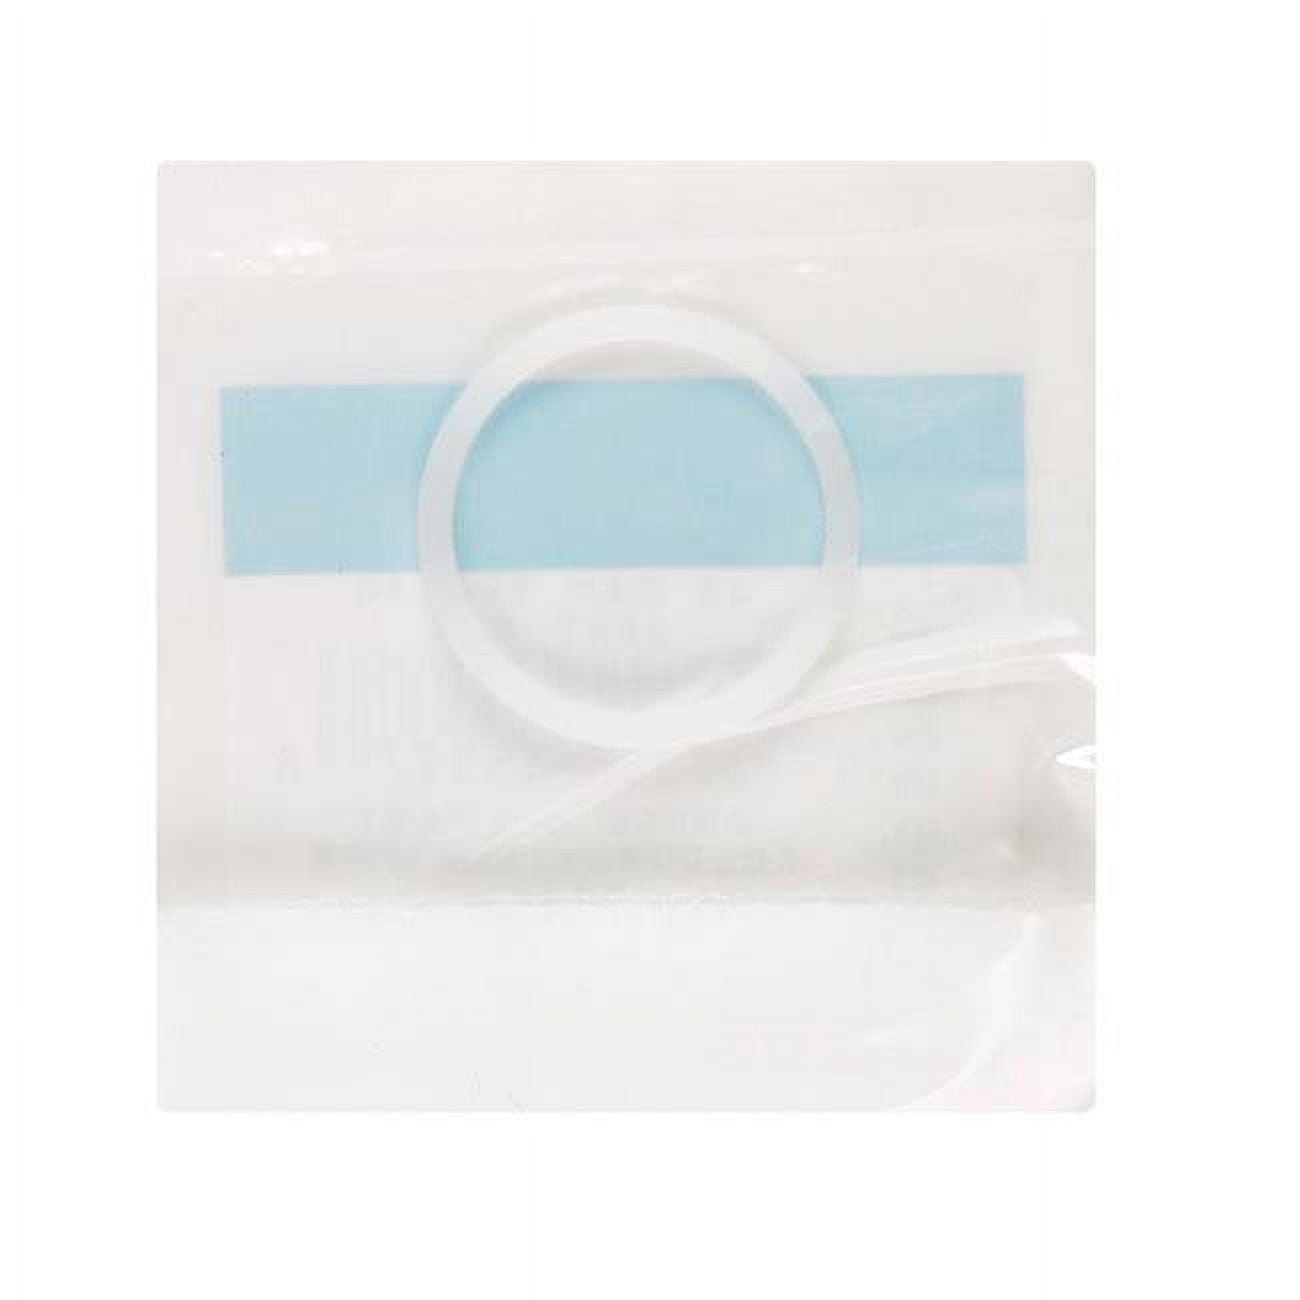 Picture of Danco 35577B No. 42 Cap Thread Gasket- pack of 5